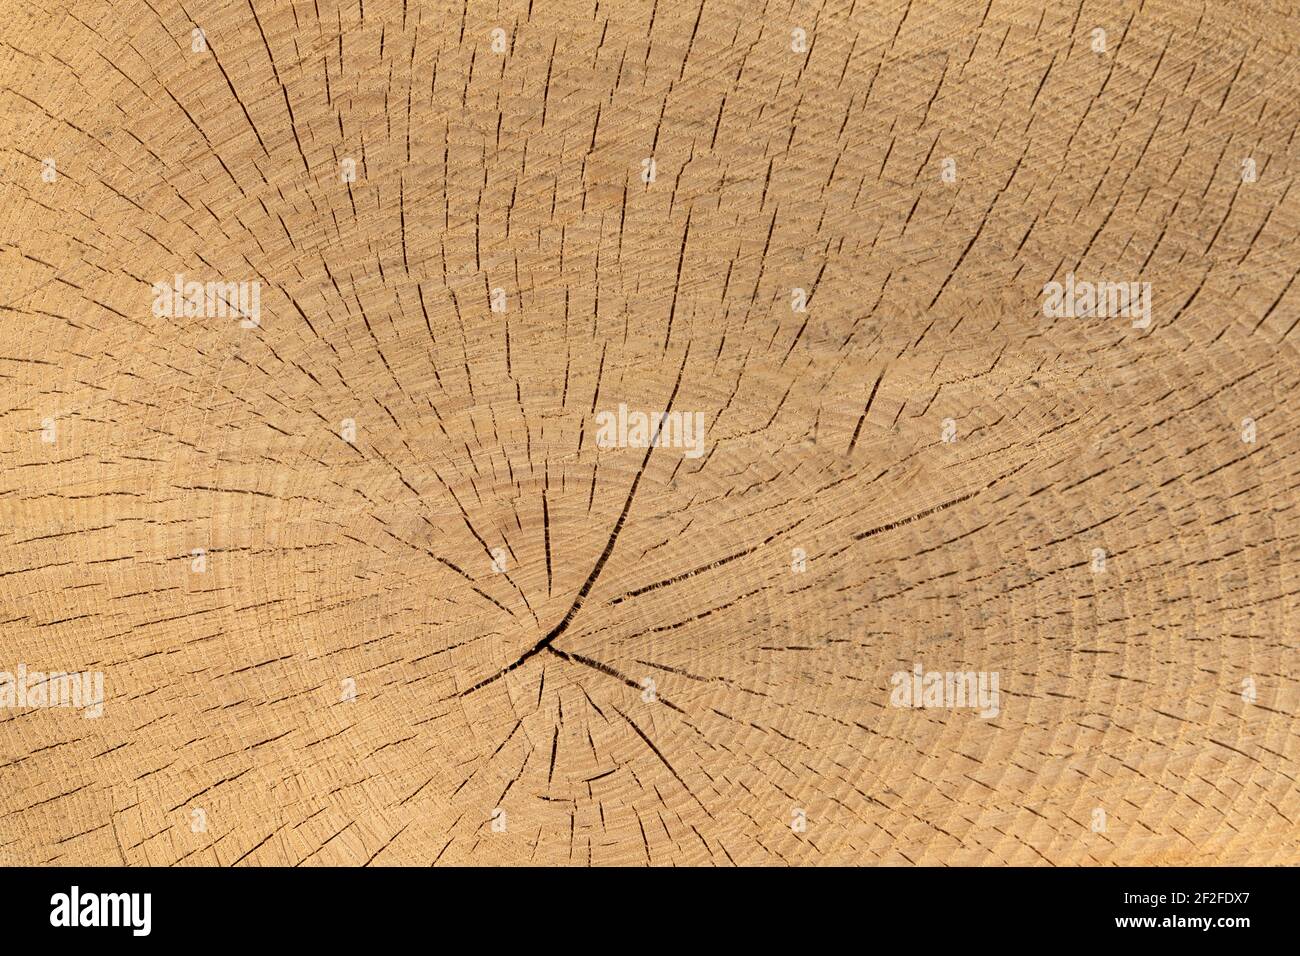 Core of a tree trunk with cracked texture Stock Photo